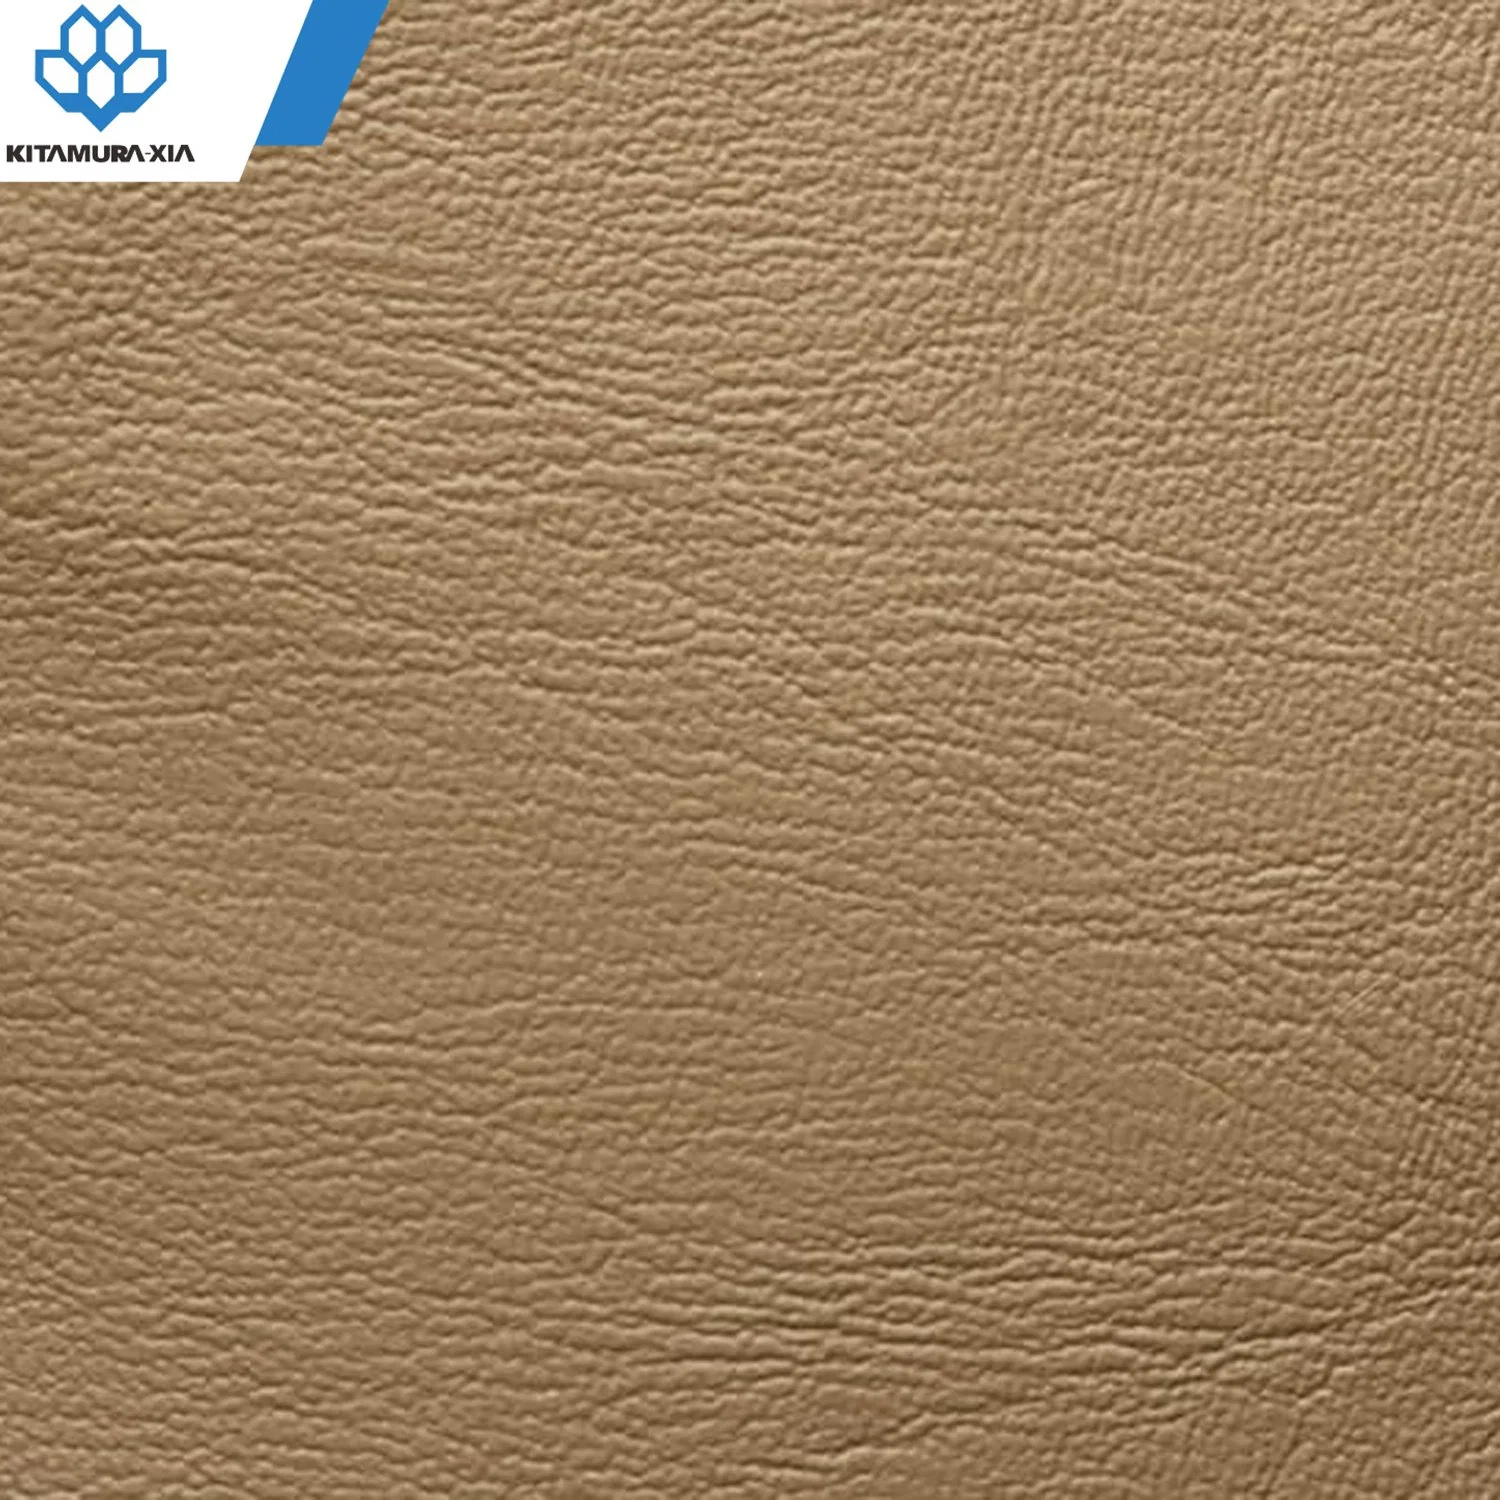 Durable and Water-Resistant Synthetic Artificial Microfiber Suede Leather Marine Vinyl